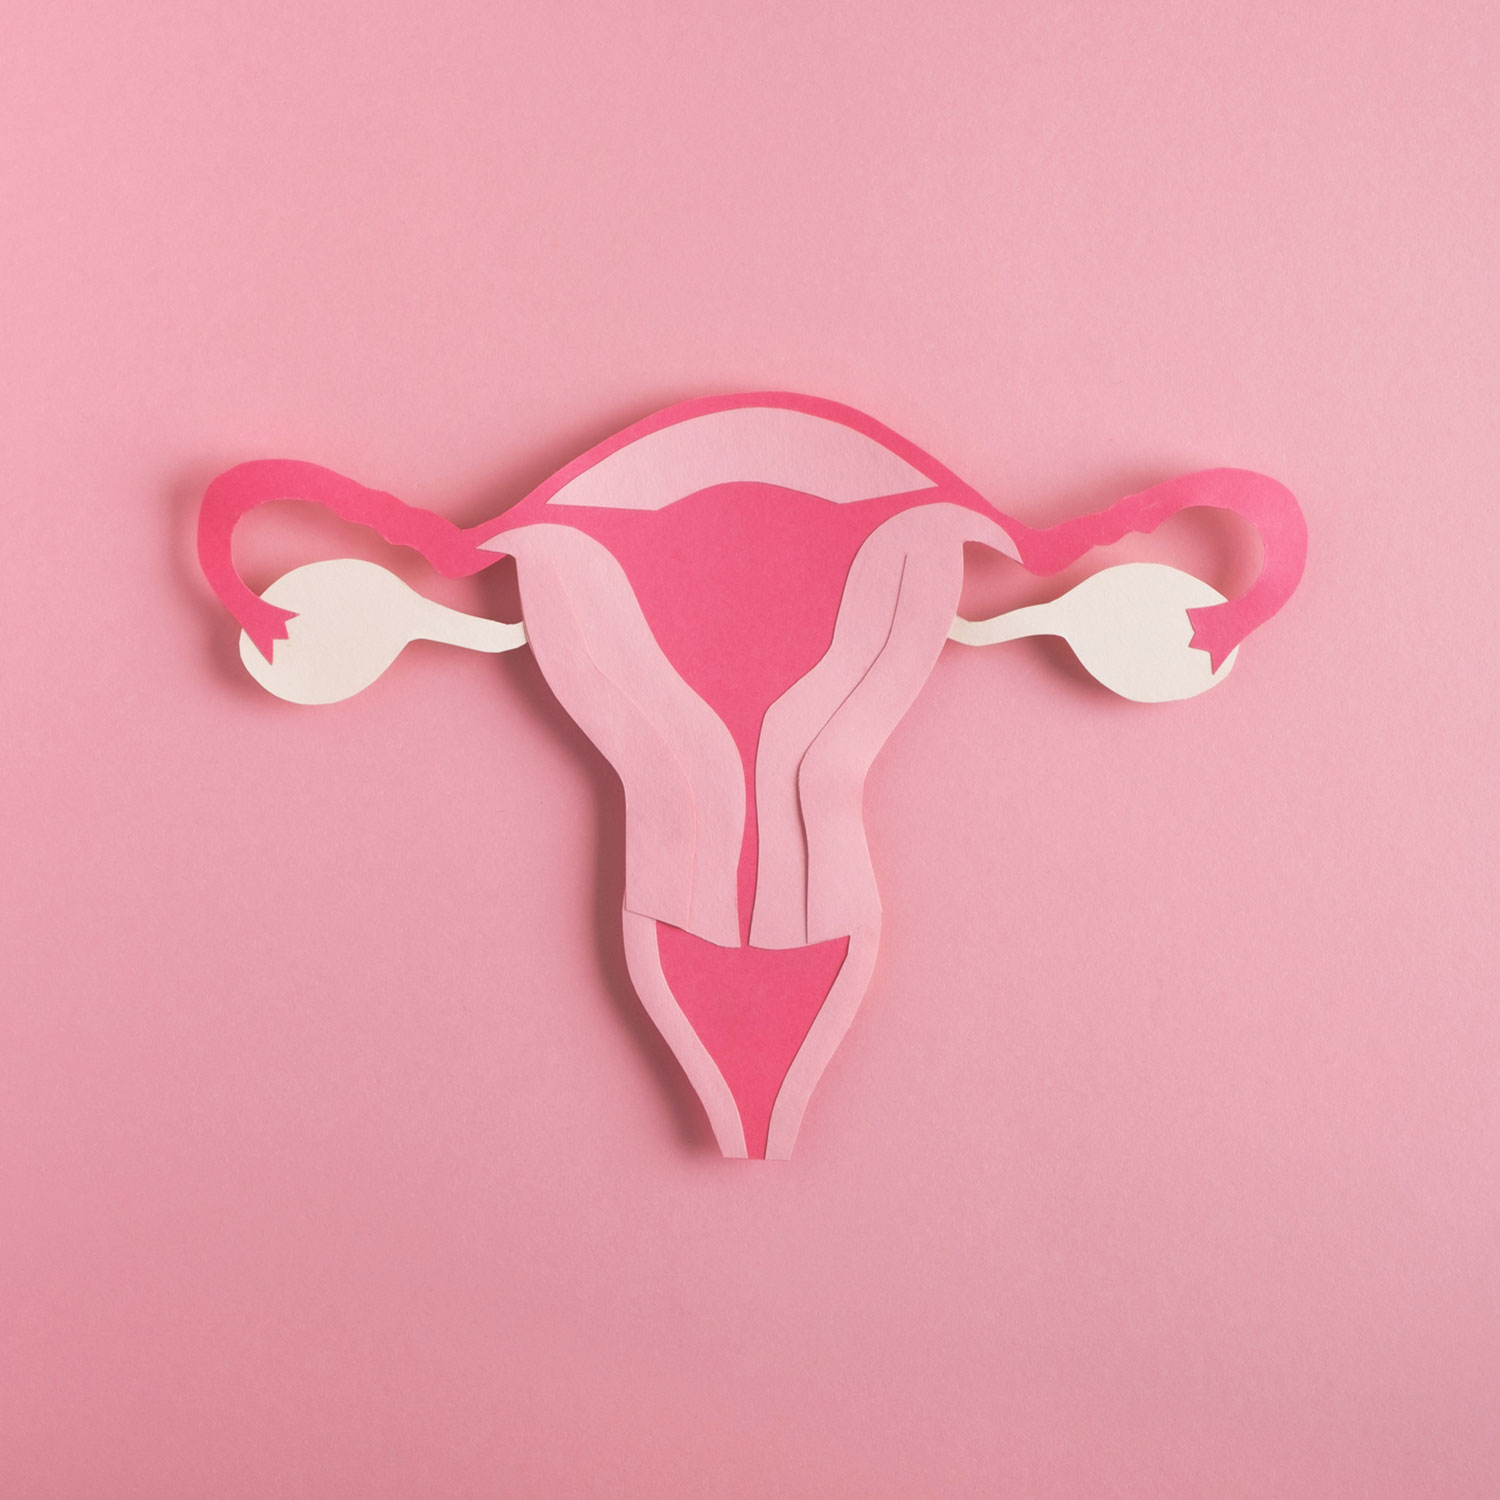 Key to growing natural tissue for female reproductive system reconstruction unlocked